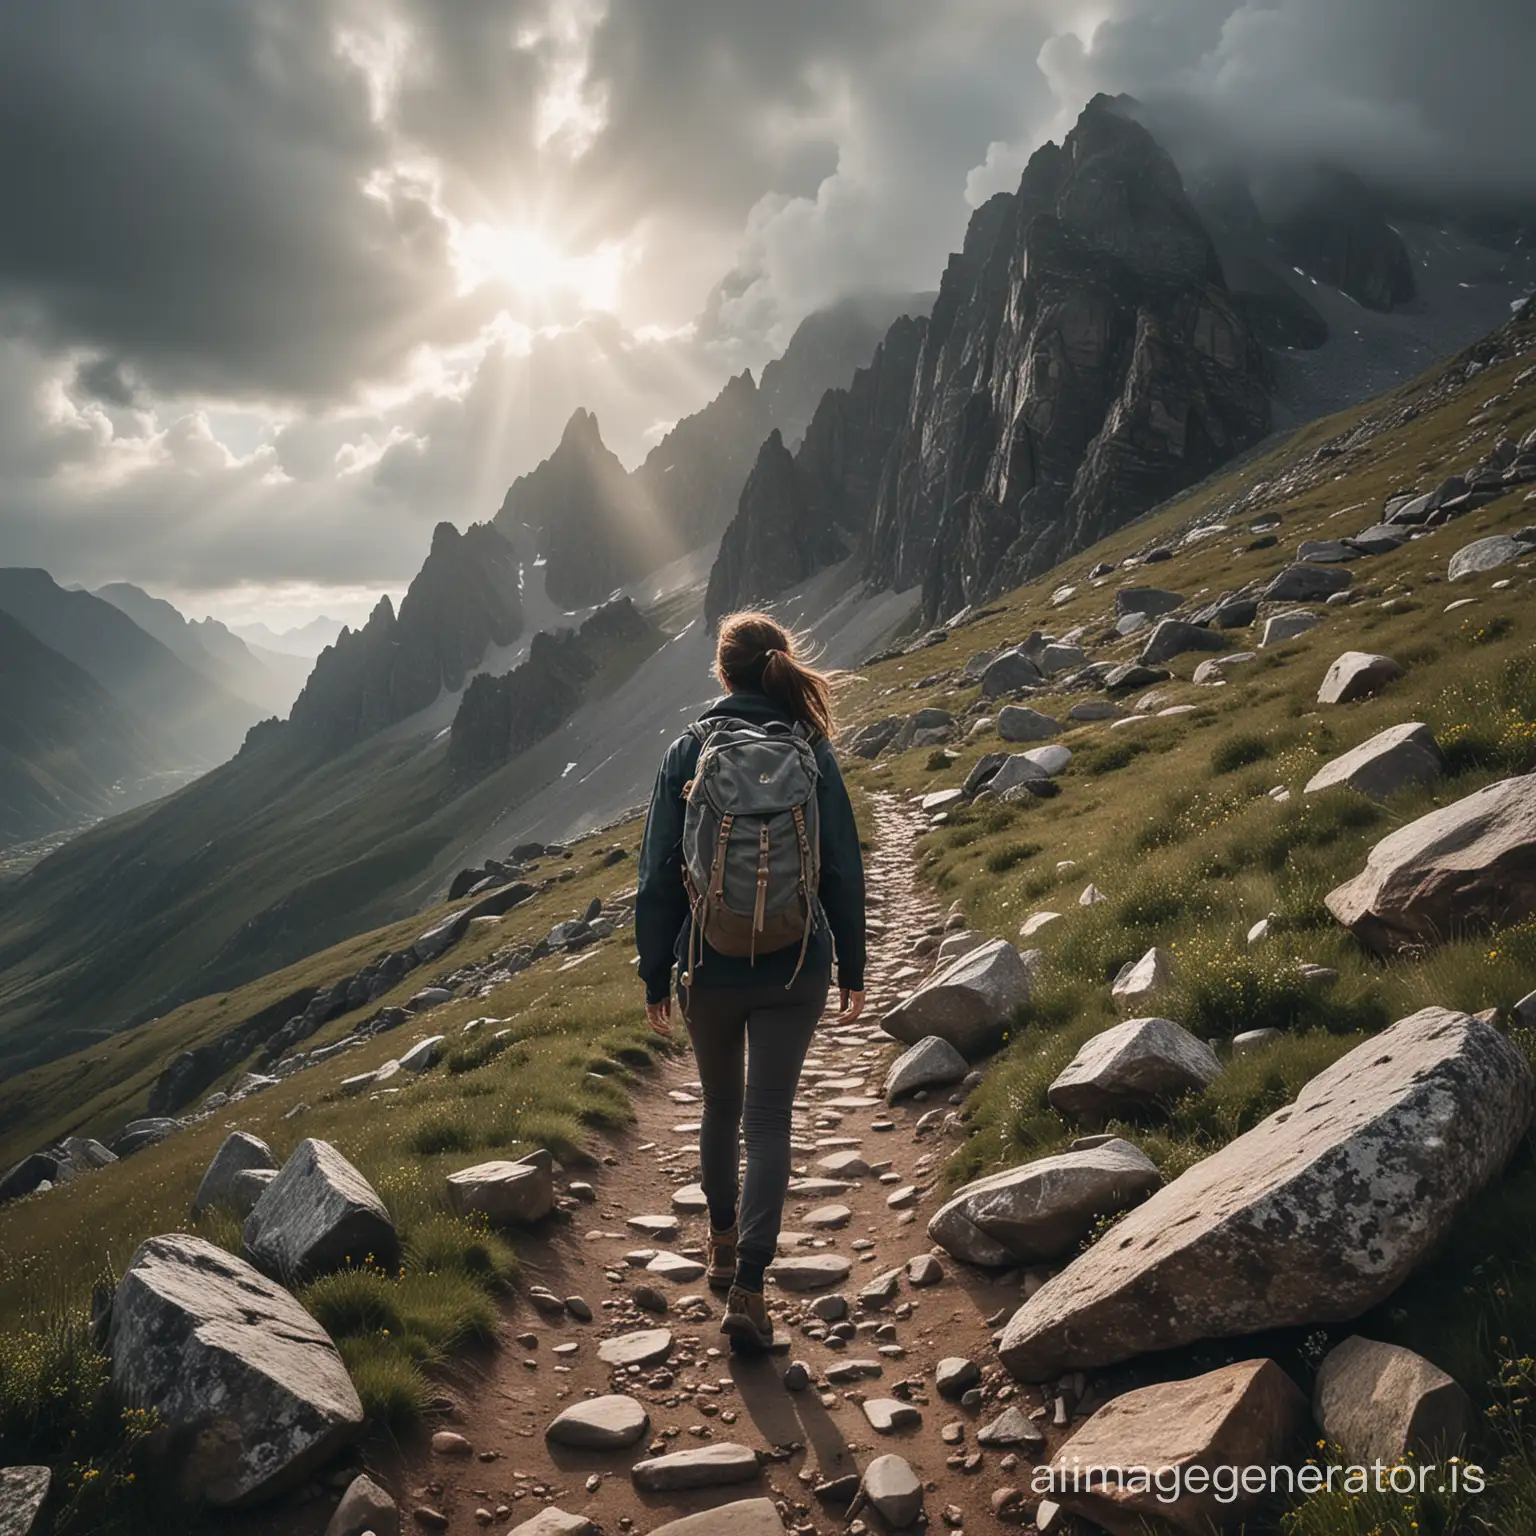 A young woman stands on the edge of a mountain slope, confidently looking ahead. She is wearing slightly torn sports clothes, a testament to the challenges she's faced on her journey. An old backpack rests on her back, filled with her personal items, reminding her of the essentials she carries on this path.  The background is dominated by thick clouds that cover the sky, veiling the sun's rays and casting an air of mystery and awe. Below her, a rugged mountain road winds down the slope, leading into a deep valley. Scattered rocks on the path serve as reminders of the hardships and obstacles she's overcome.  Amidst the overcast sky, a faint ray of sun breaks through the clouds, symbolizing hope and endless possibilities. On the ground, footprints mark the passage of others who've trodden this challenging path before her, a silent testament to the resilience and courage shared by those who face the mountains of life.